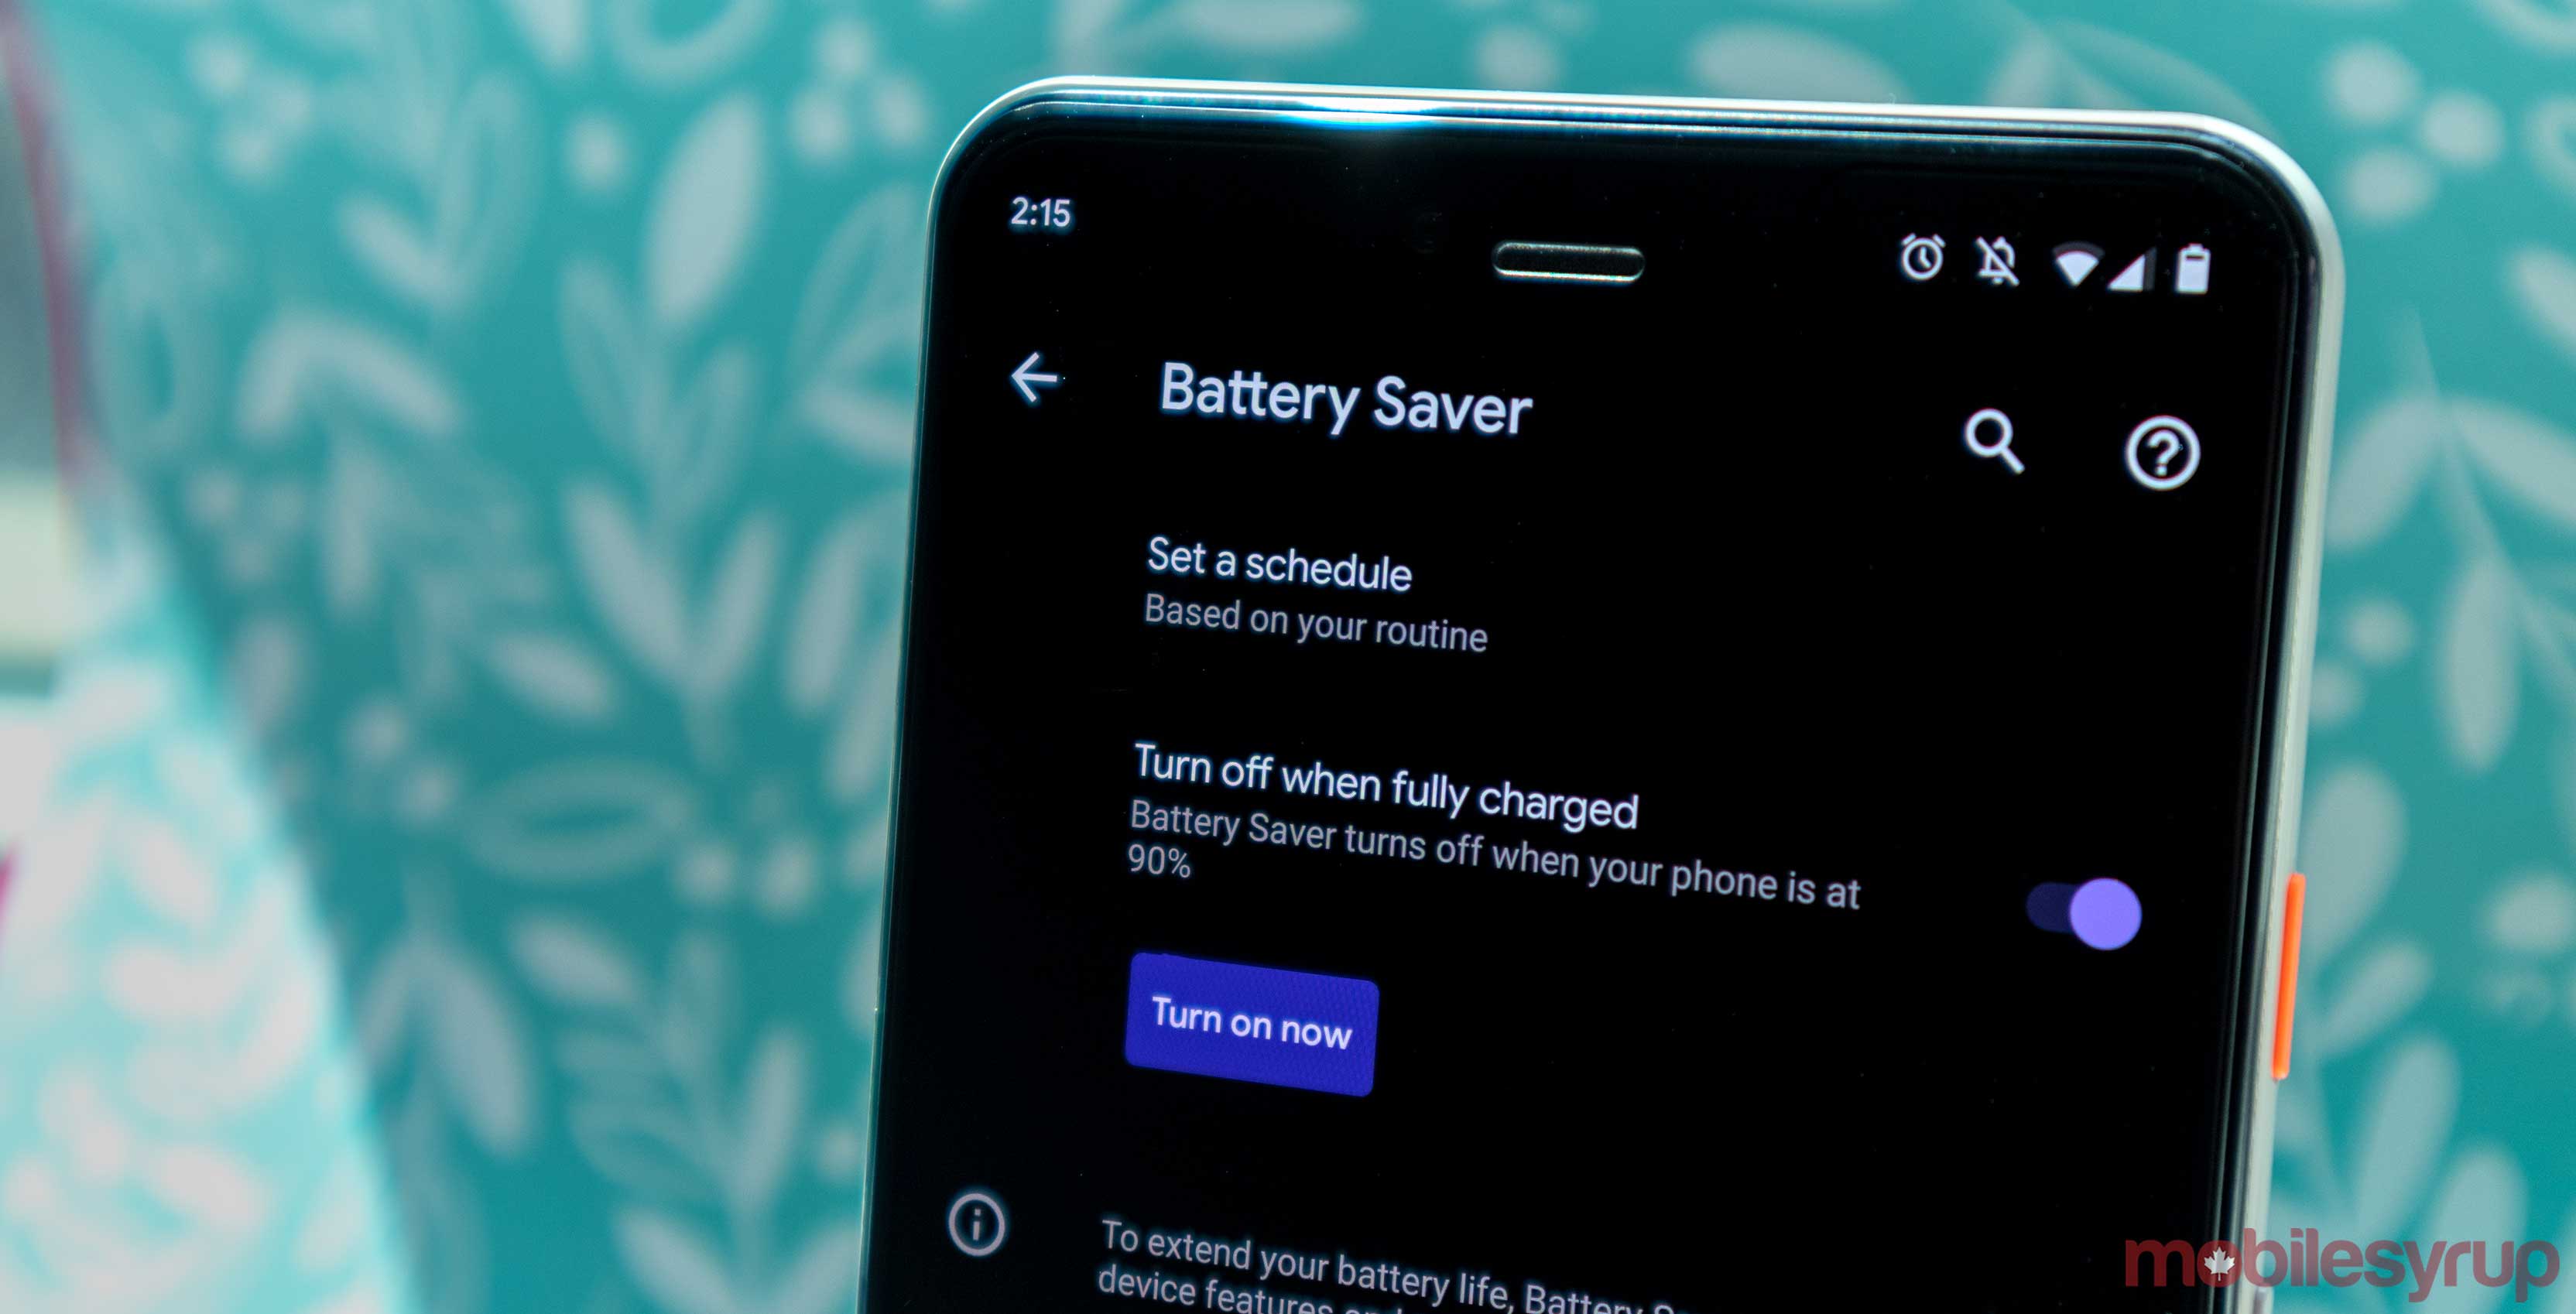 Android Battery Saver setting turns on on your usage